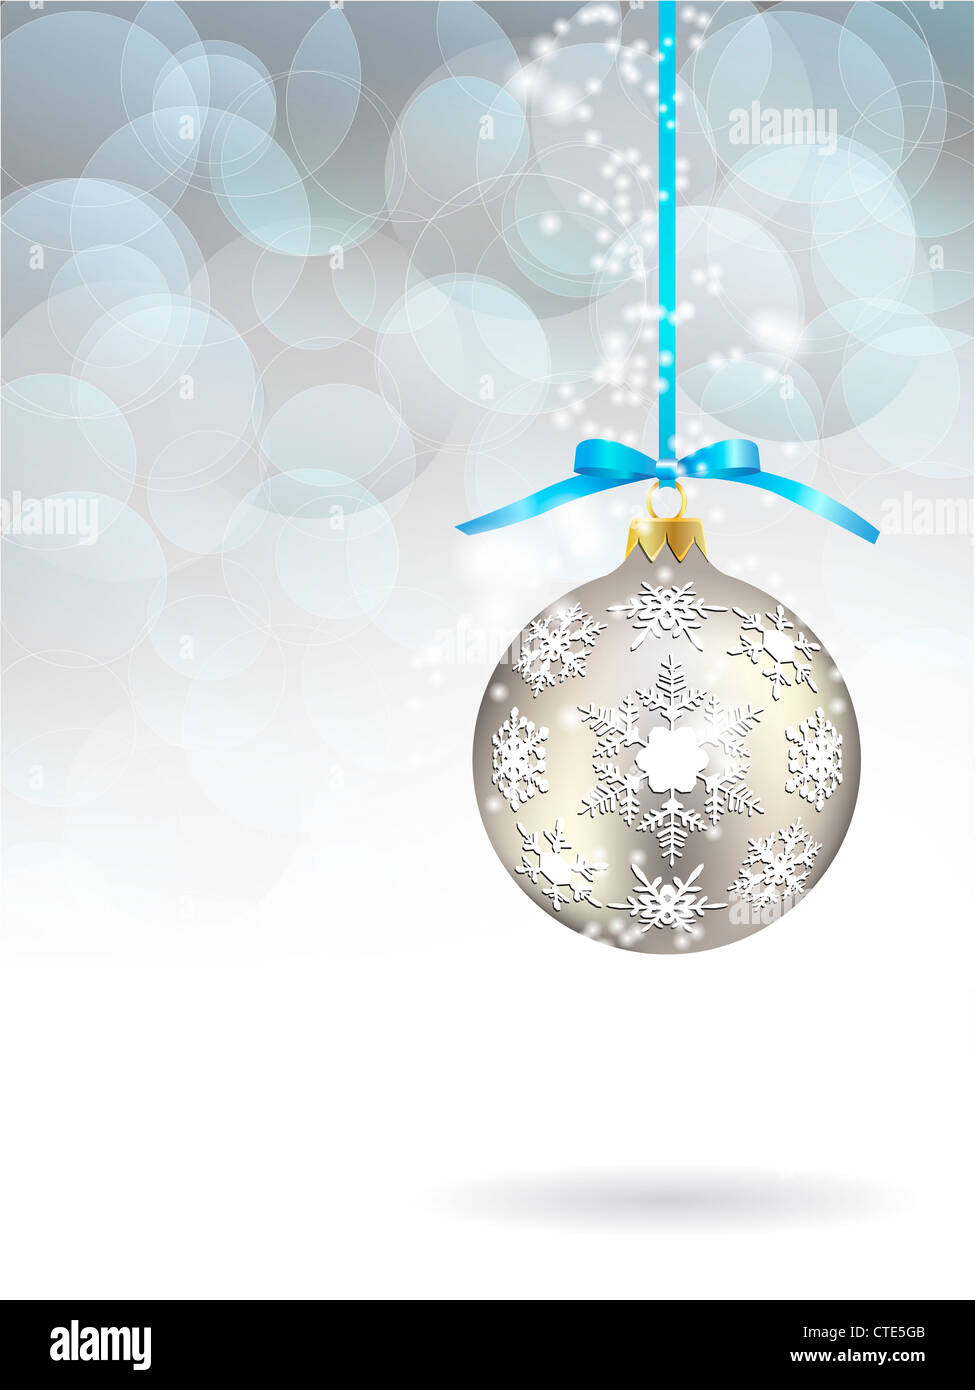 backdrop, background, ball, baubles, beautiful, blur, blurred, bow, bright, card, celebration, christmas, decoration, decorative Stock Photo